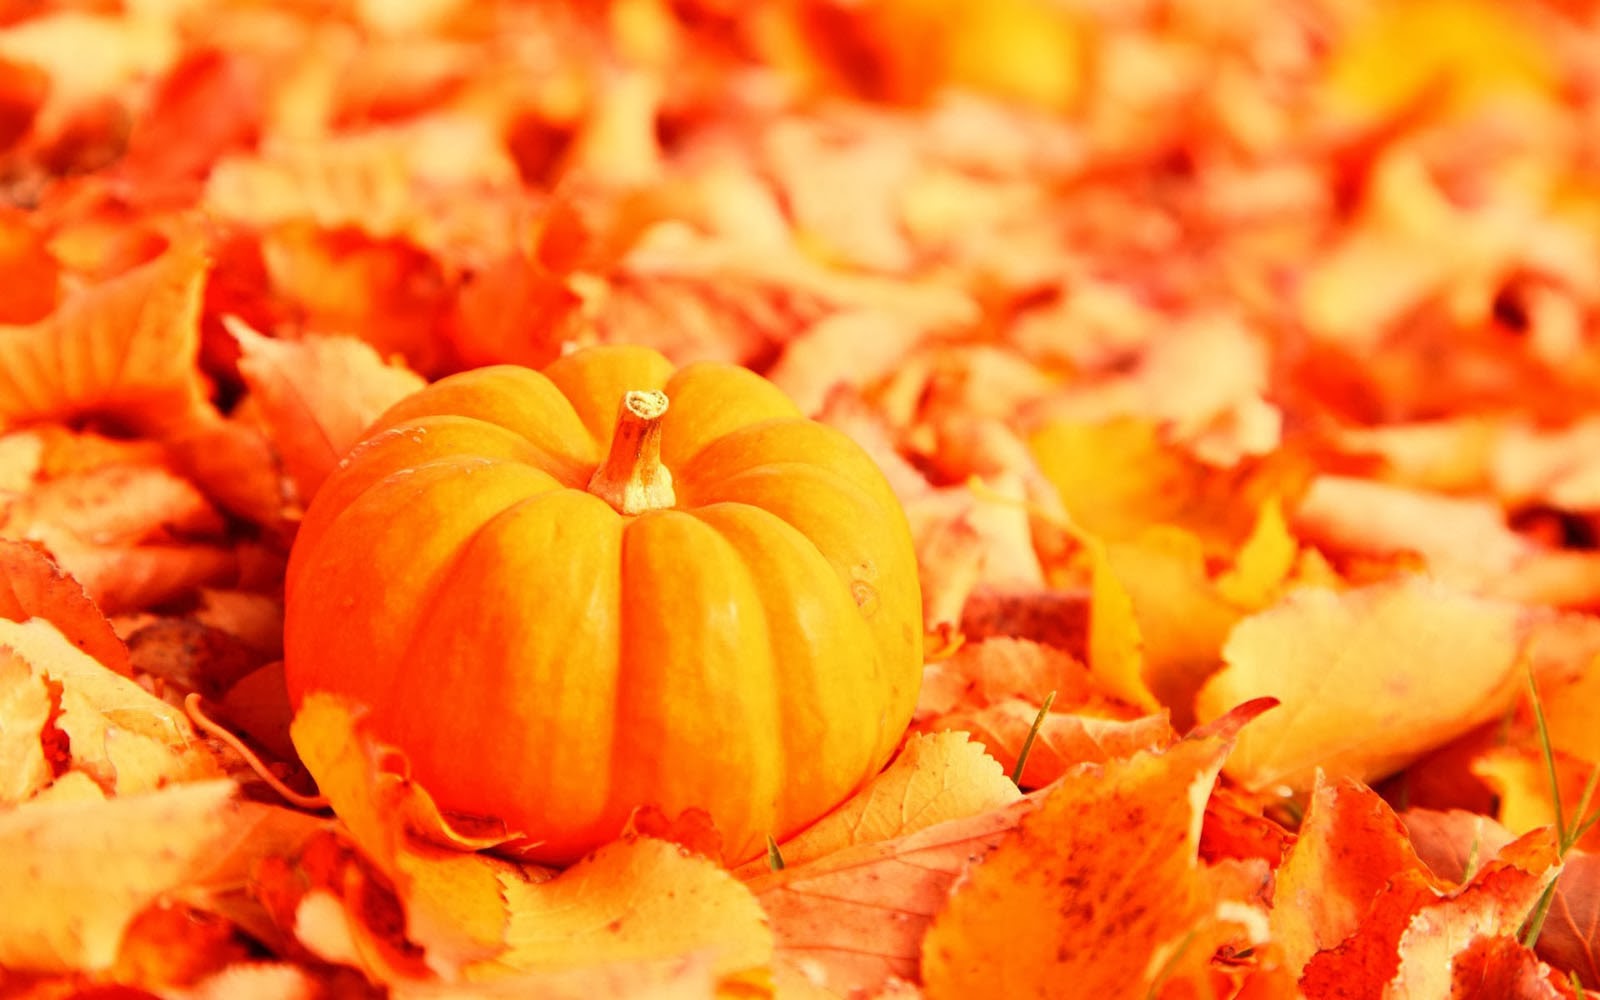 Tag Pumpkin Wallpaper Background Photos Image Andpictures For